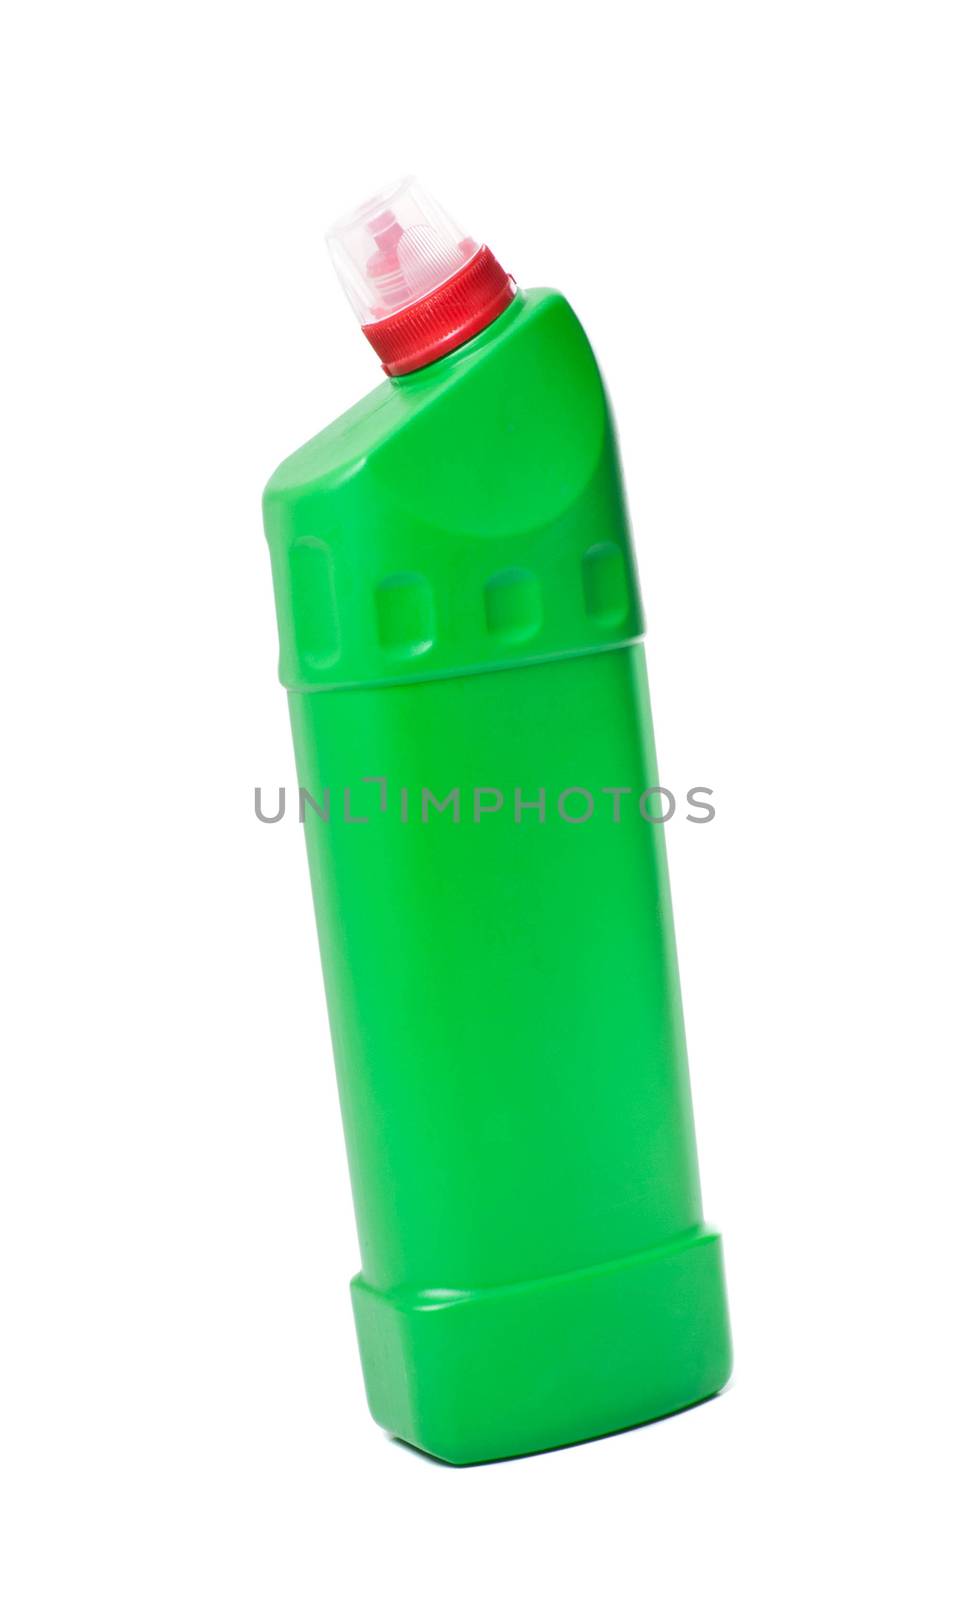 Greeb cleaning detergent bottle isolated